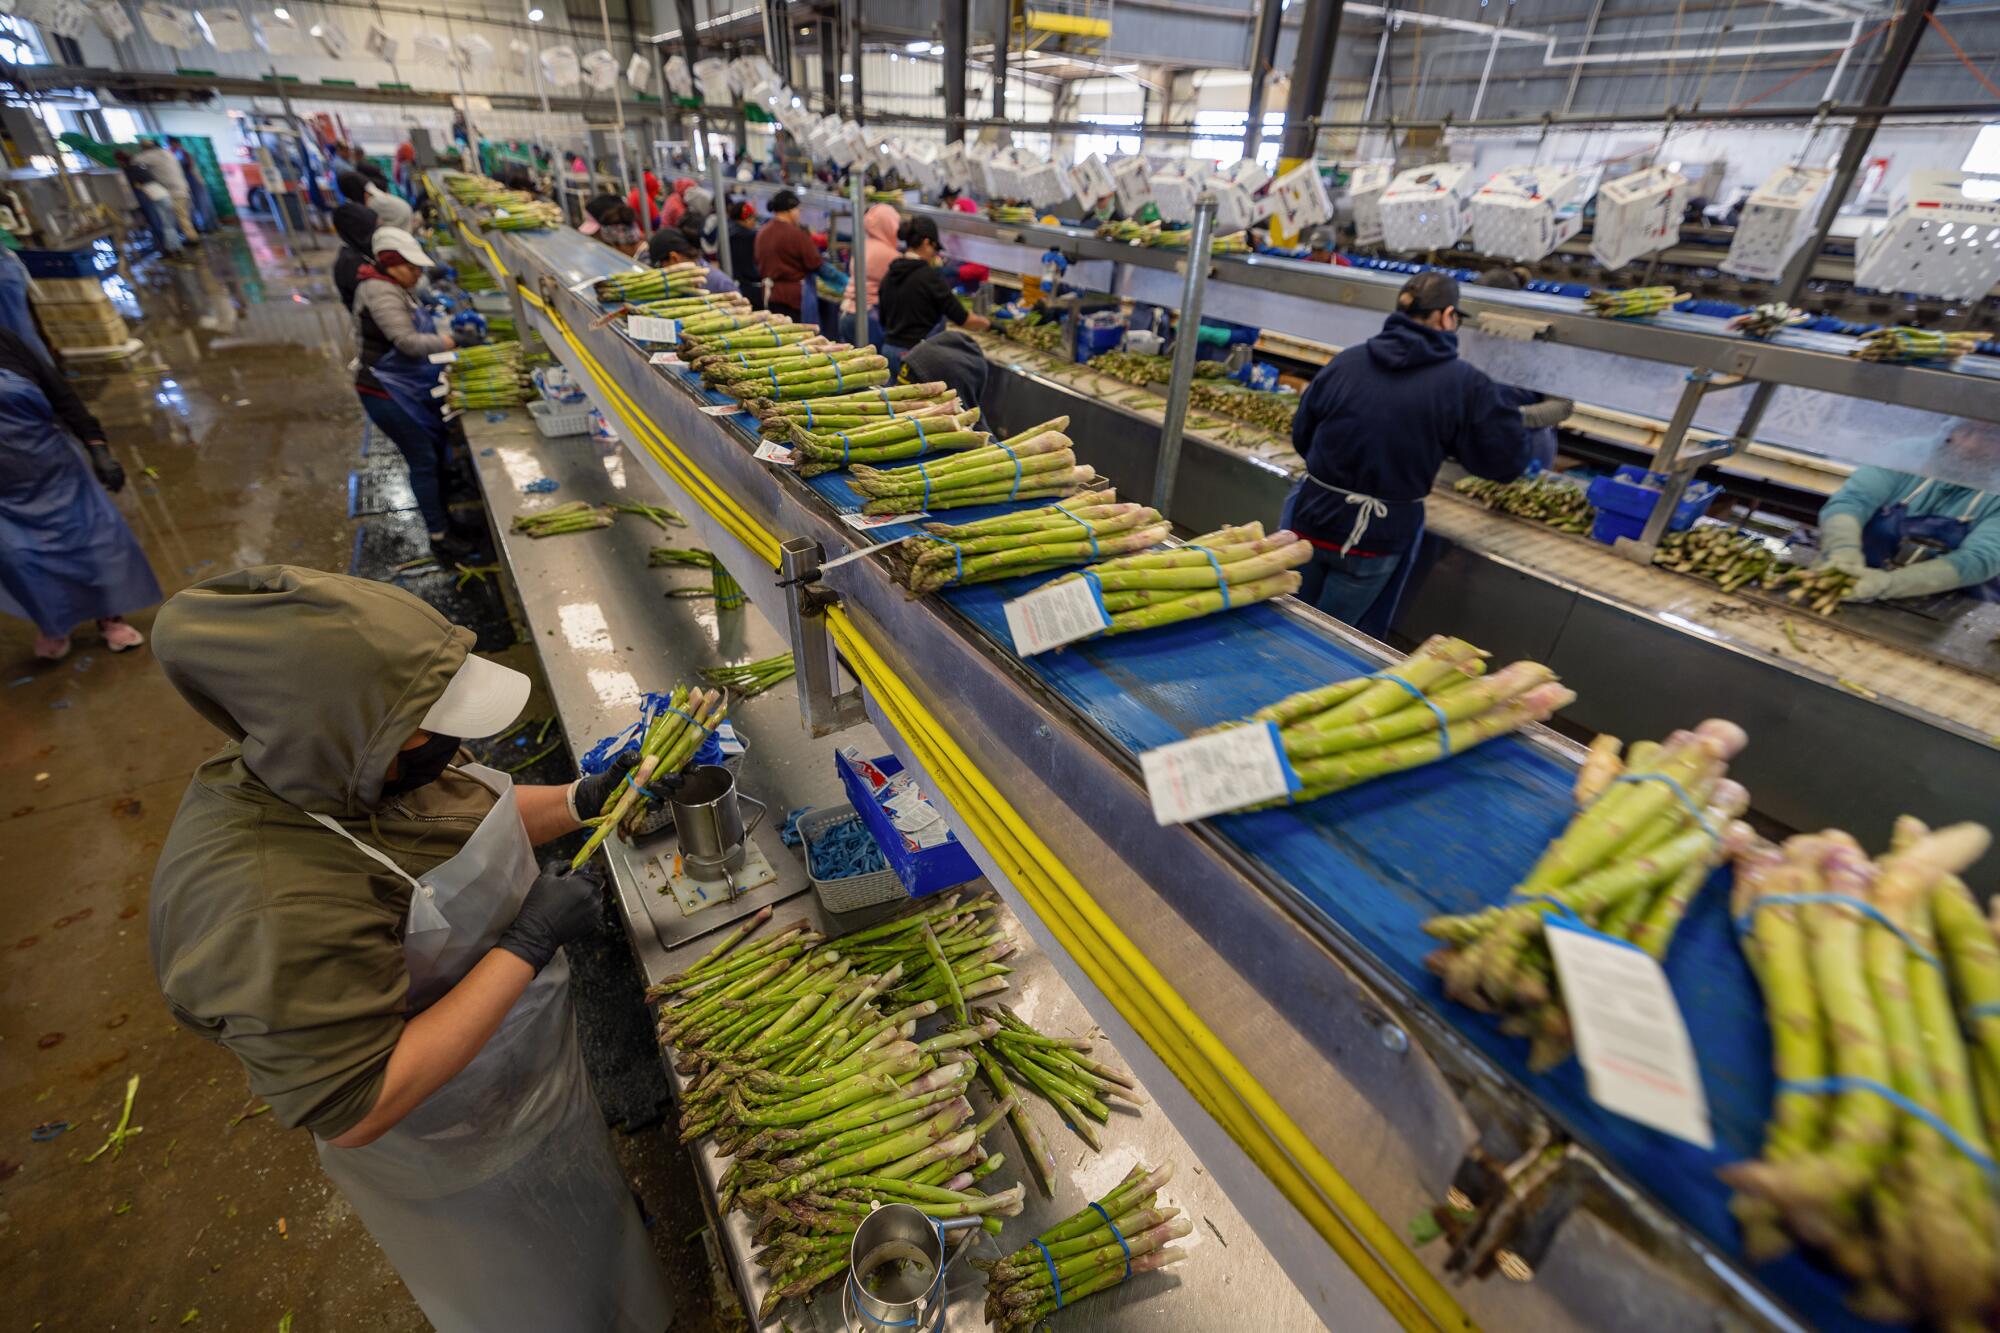 Workers sort and bundle asparagus.